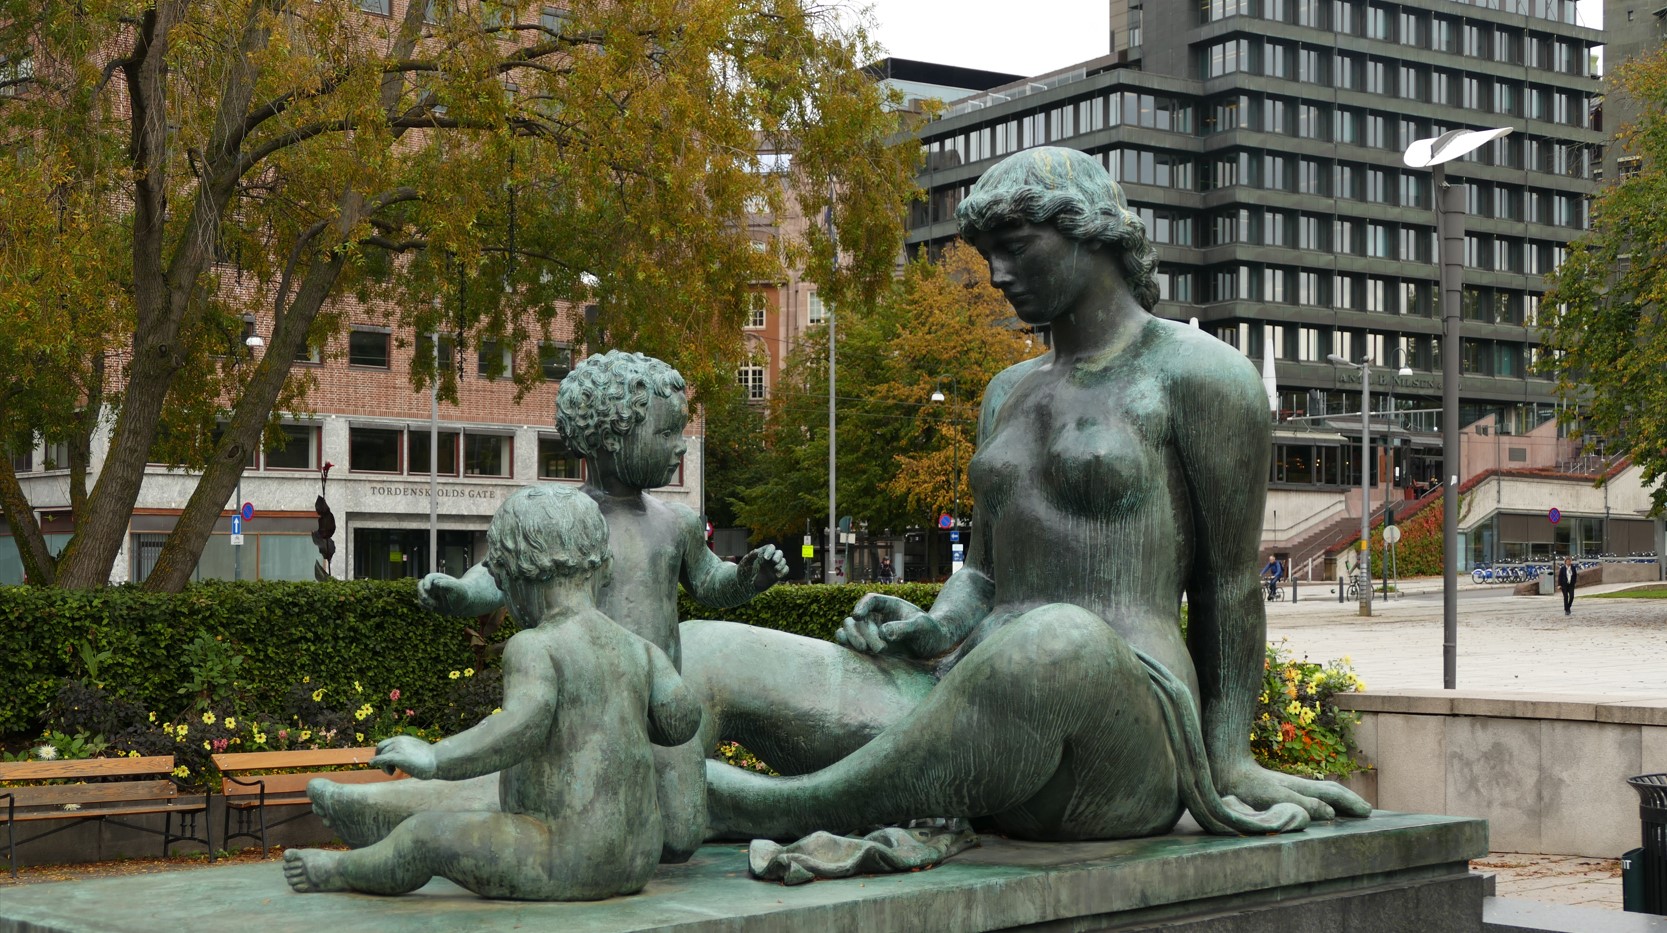 Severe drop in childbirth rates across the Nordics